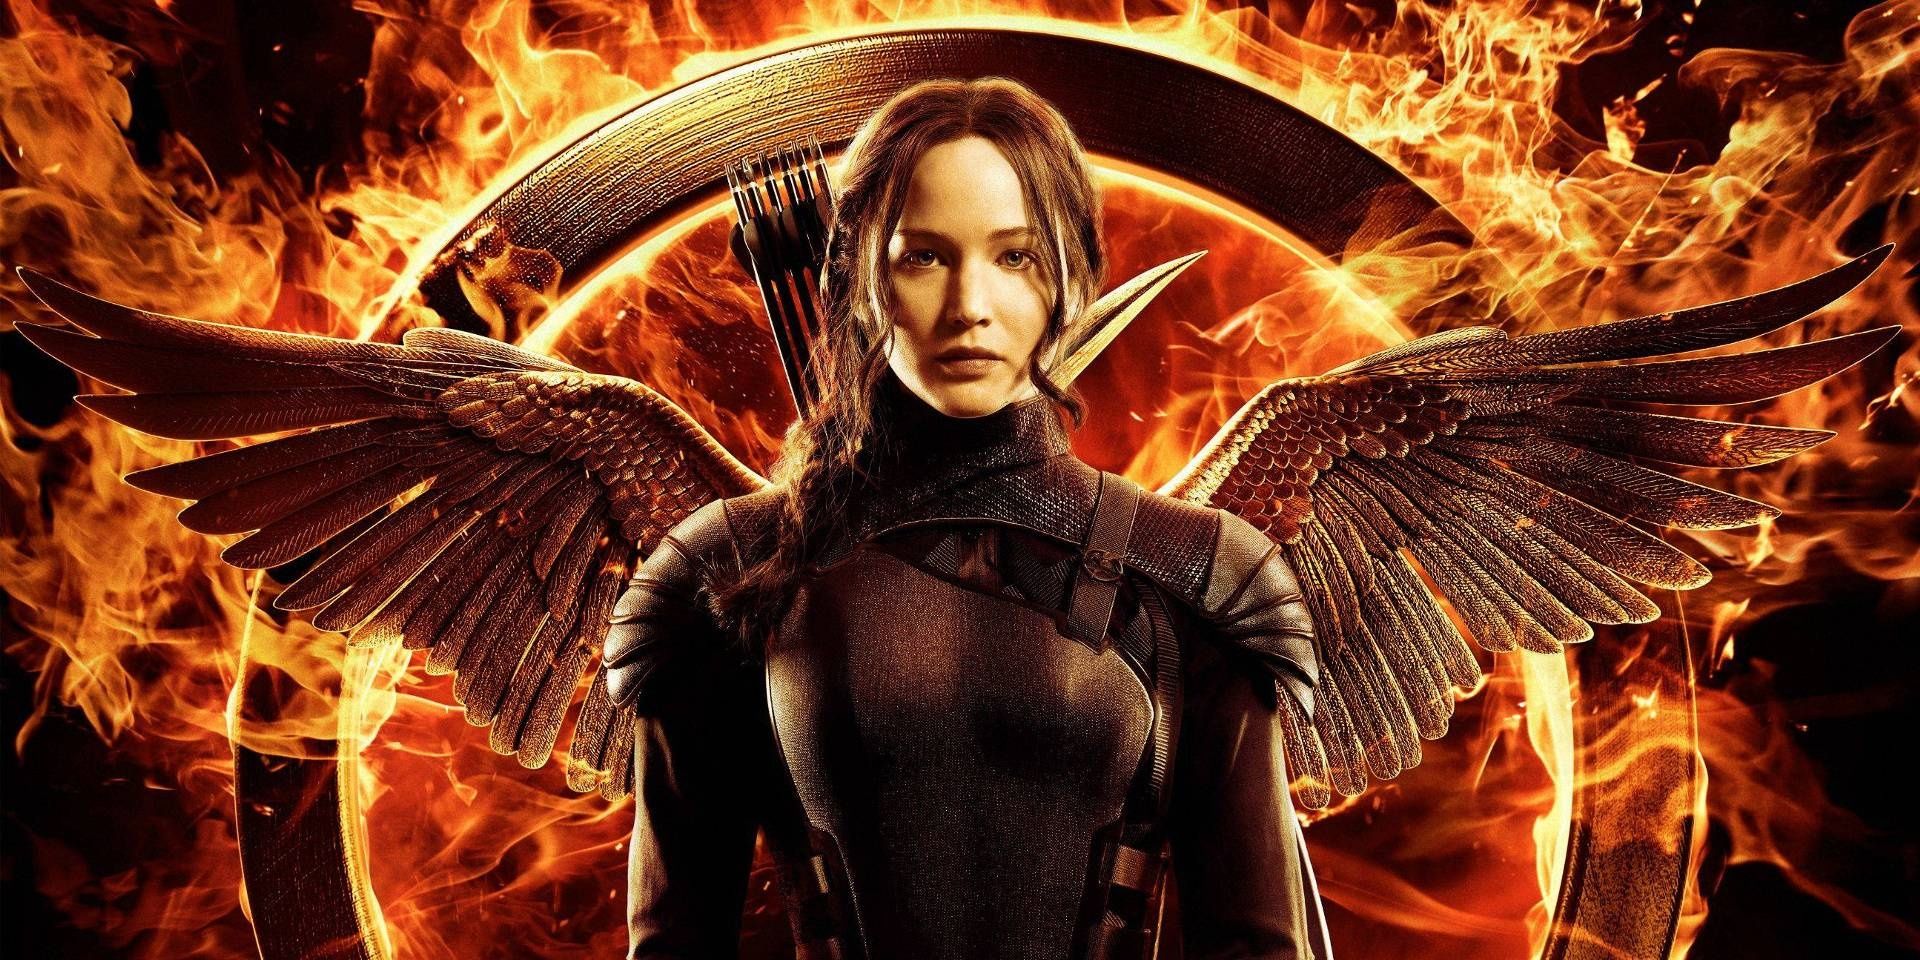 Jennifer Lawrence as Katniss Everdeen in The Hunger Games with fiery background